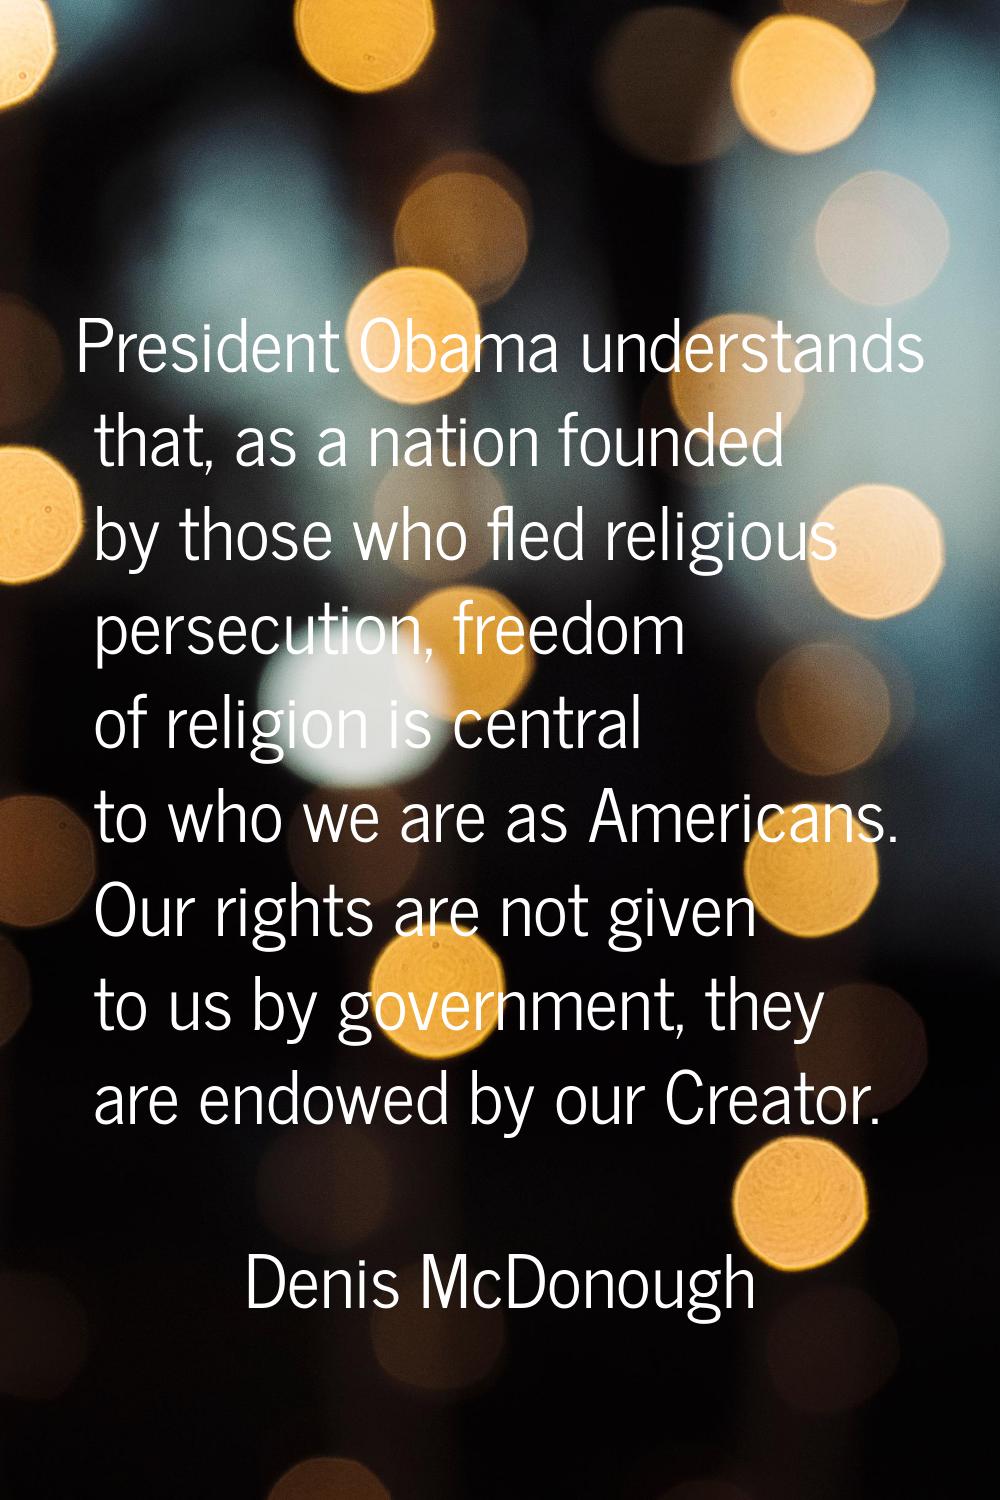 President Obama understands that, as a nation founded by those who fled religious persecution, free